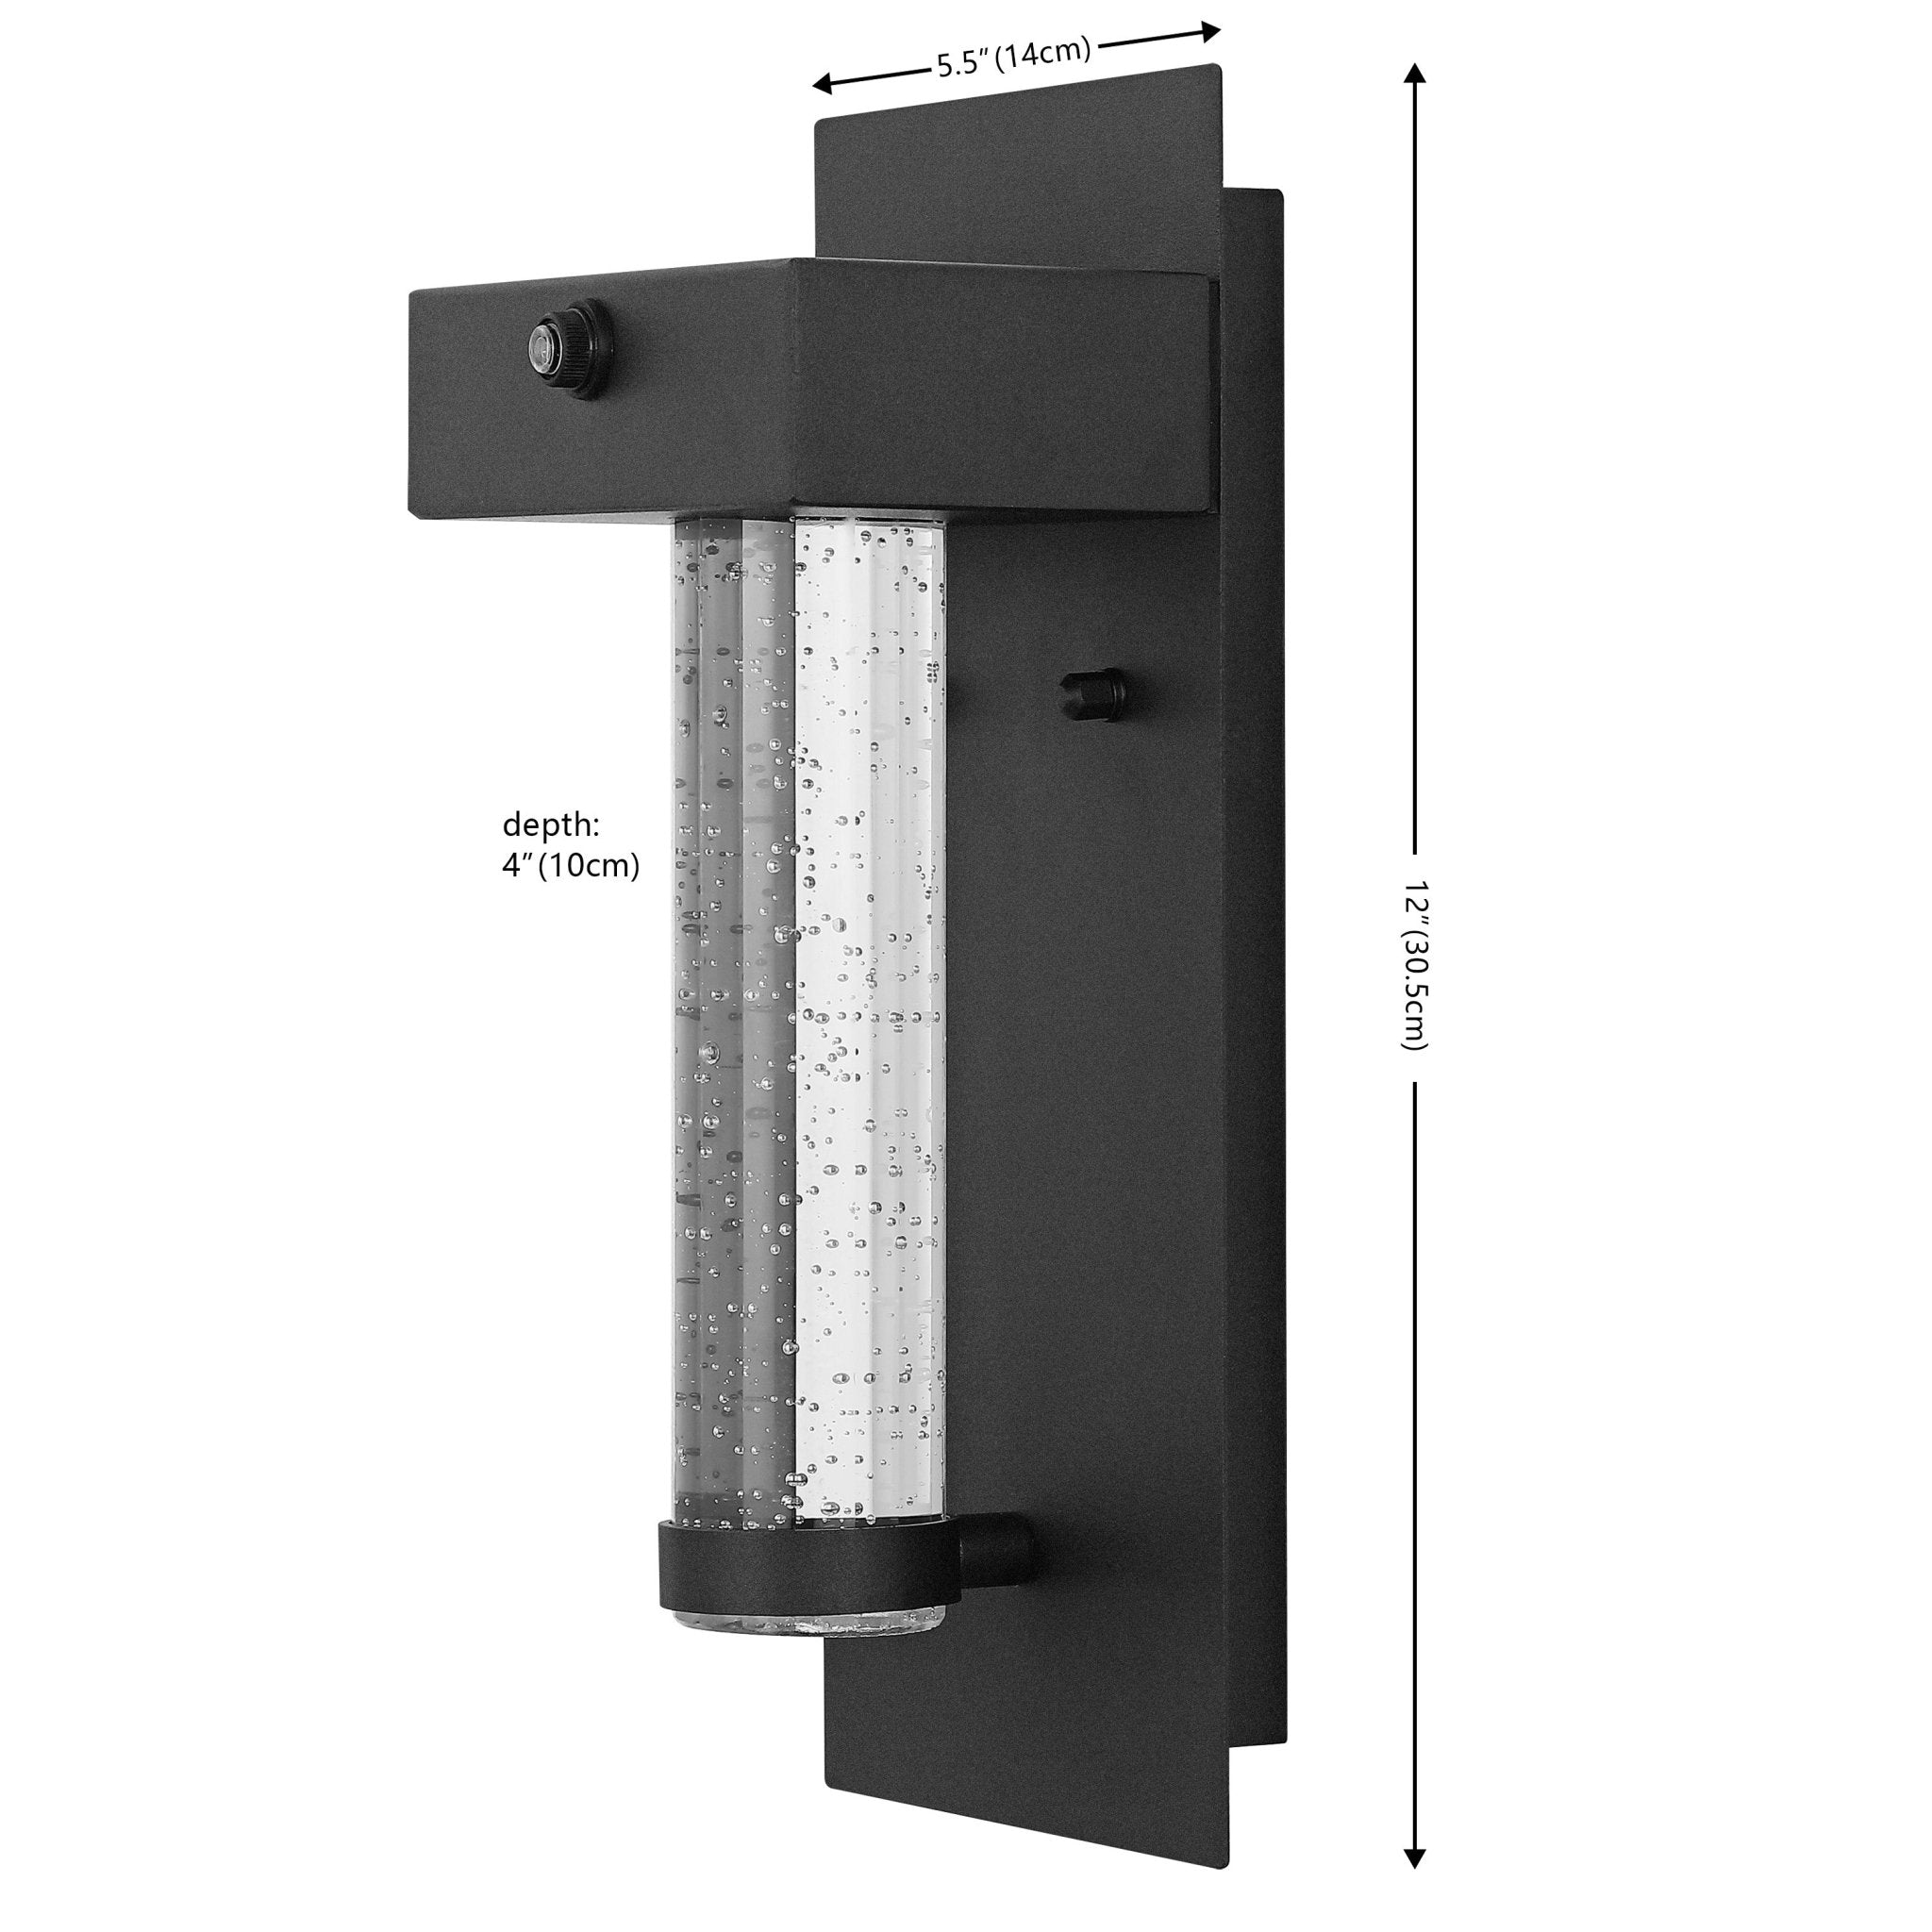 Horizone Light Minimalist Industrial Iron/Seeded Glass with DusktoDawn Sensor Integrated LED Outdoor Sconce - Pier 1